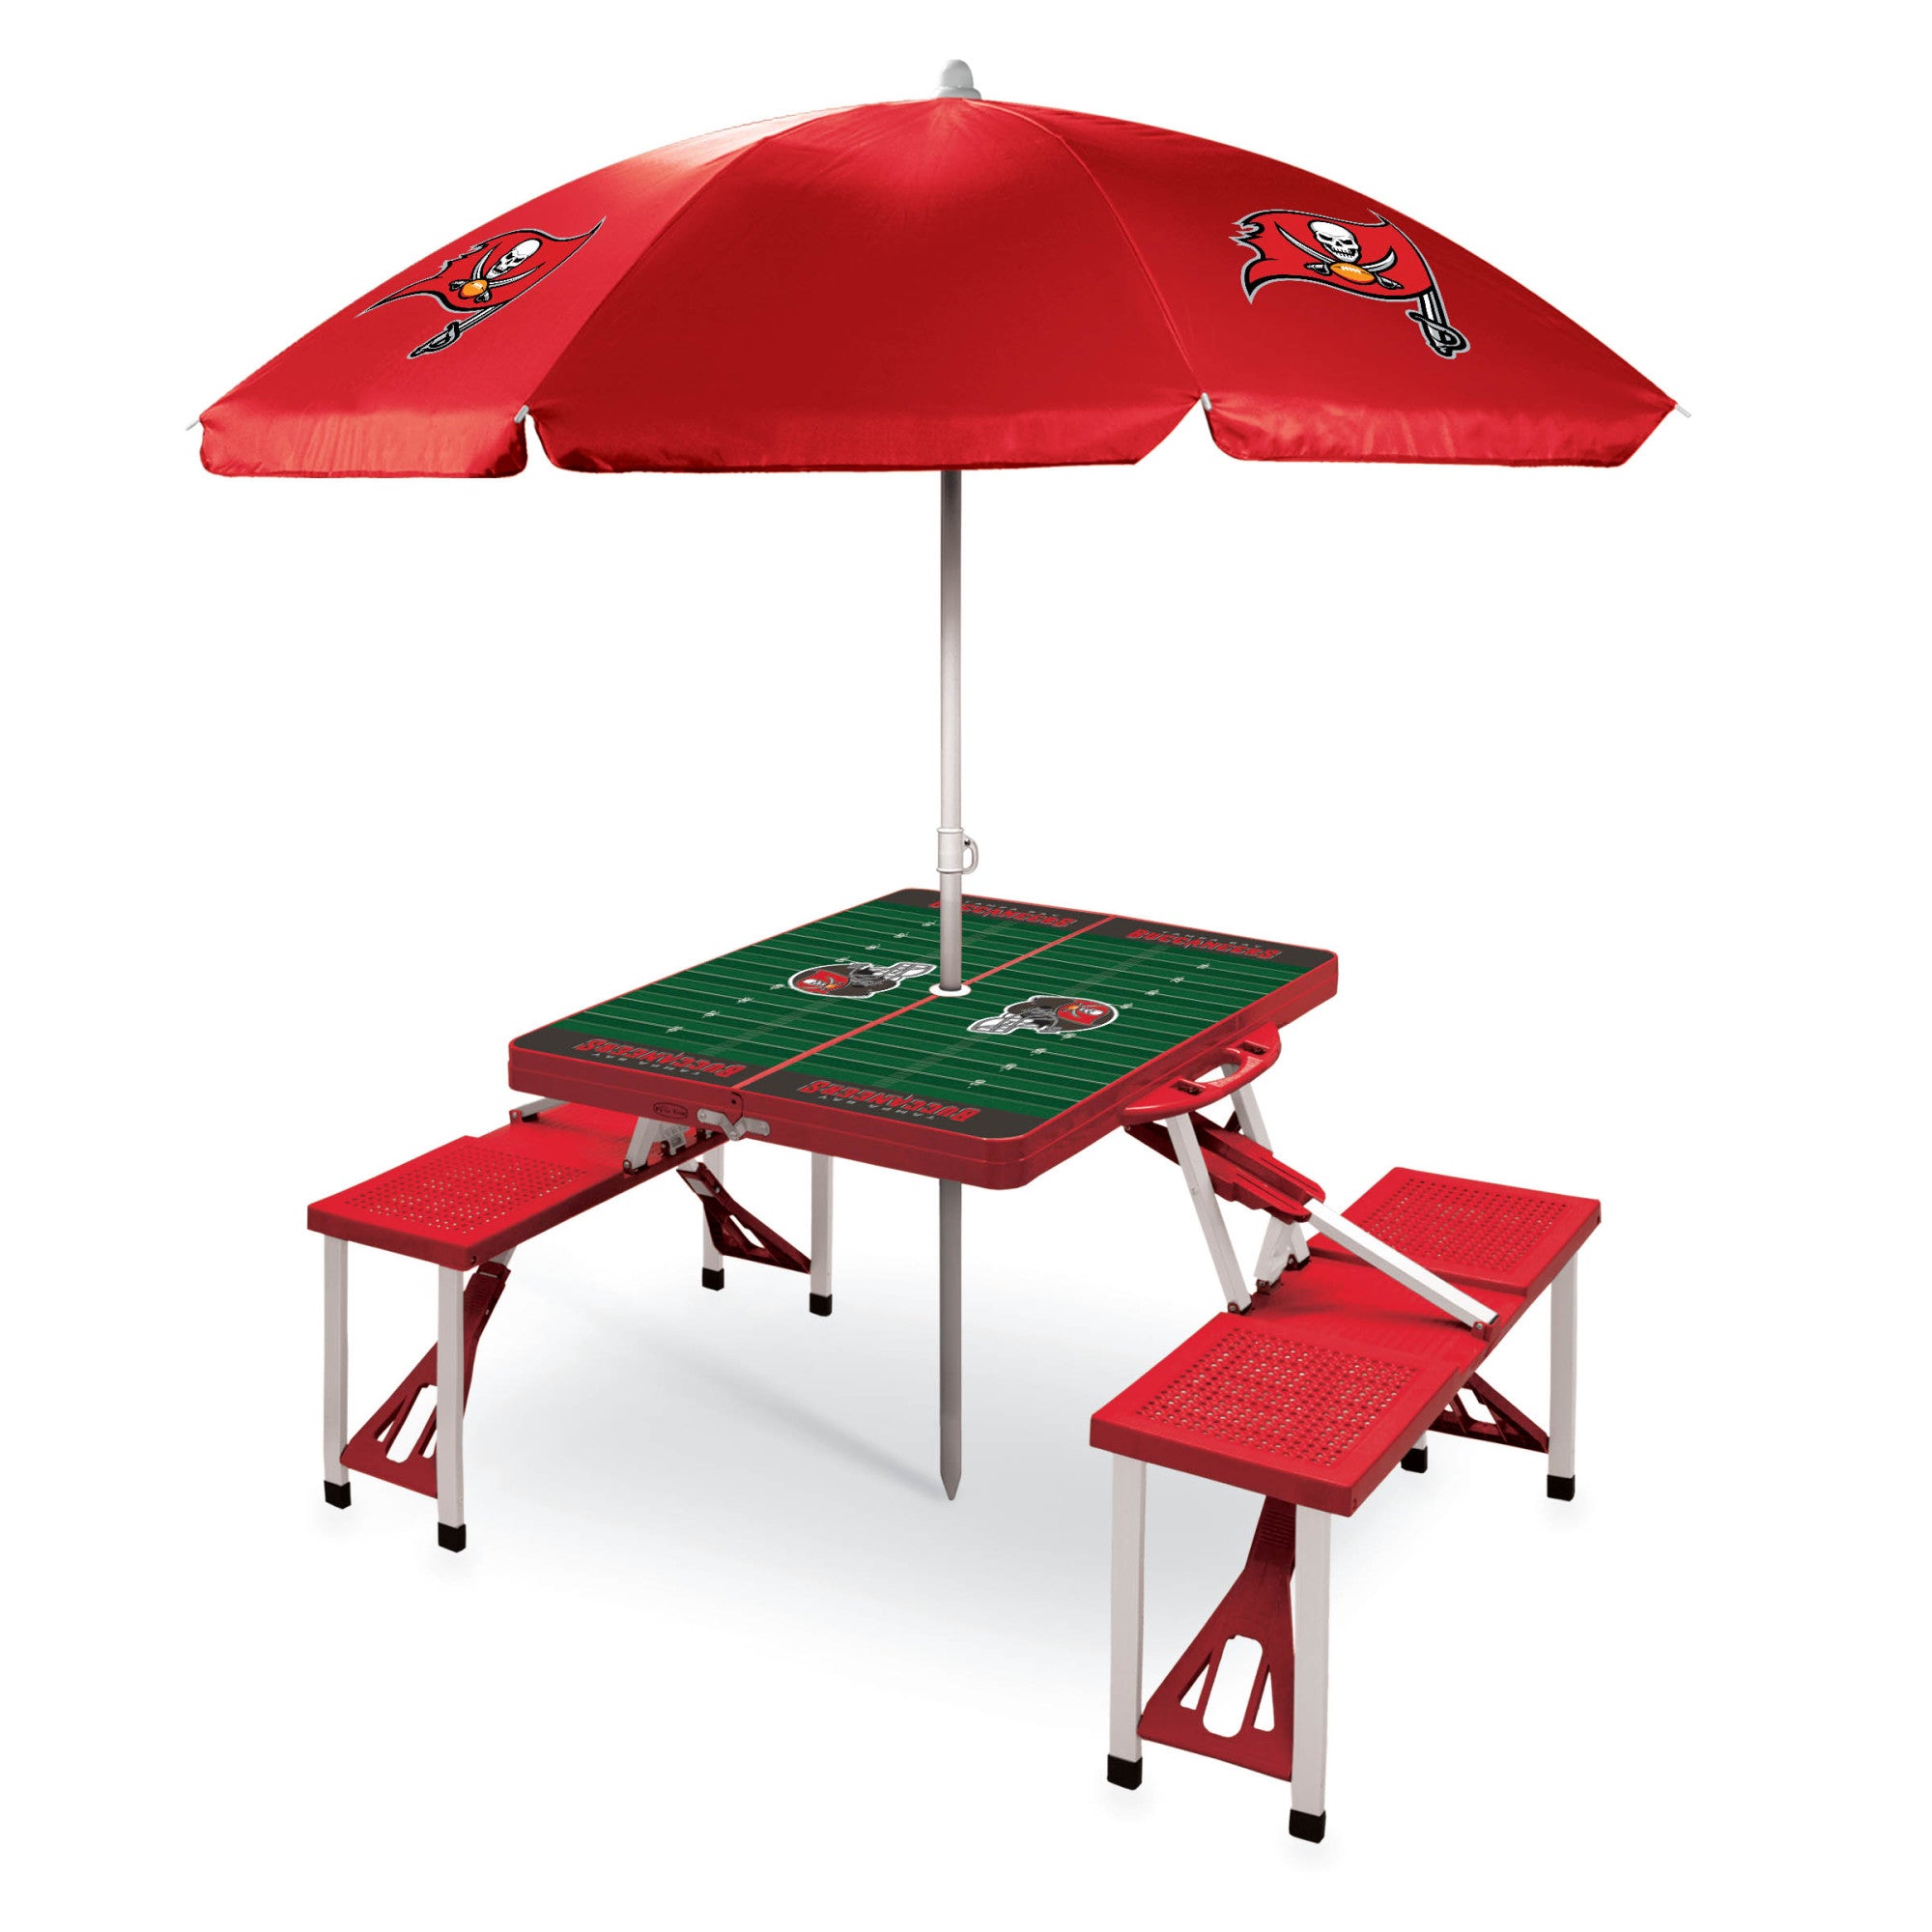 Tampa Bay Buccaneers - Picnic Table Portable Folding Table with Seats and Umbrella